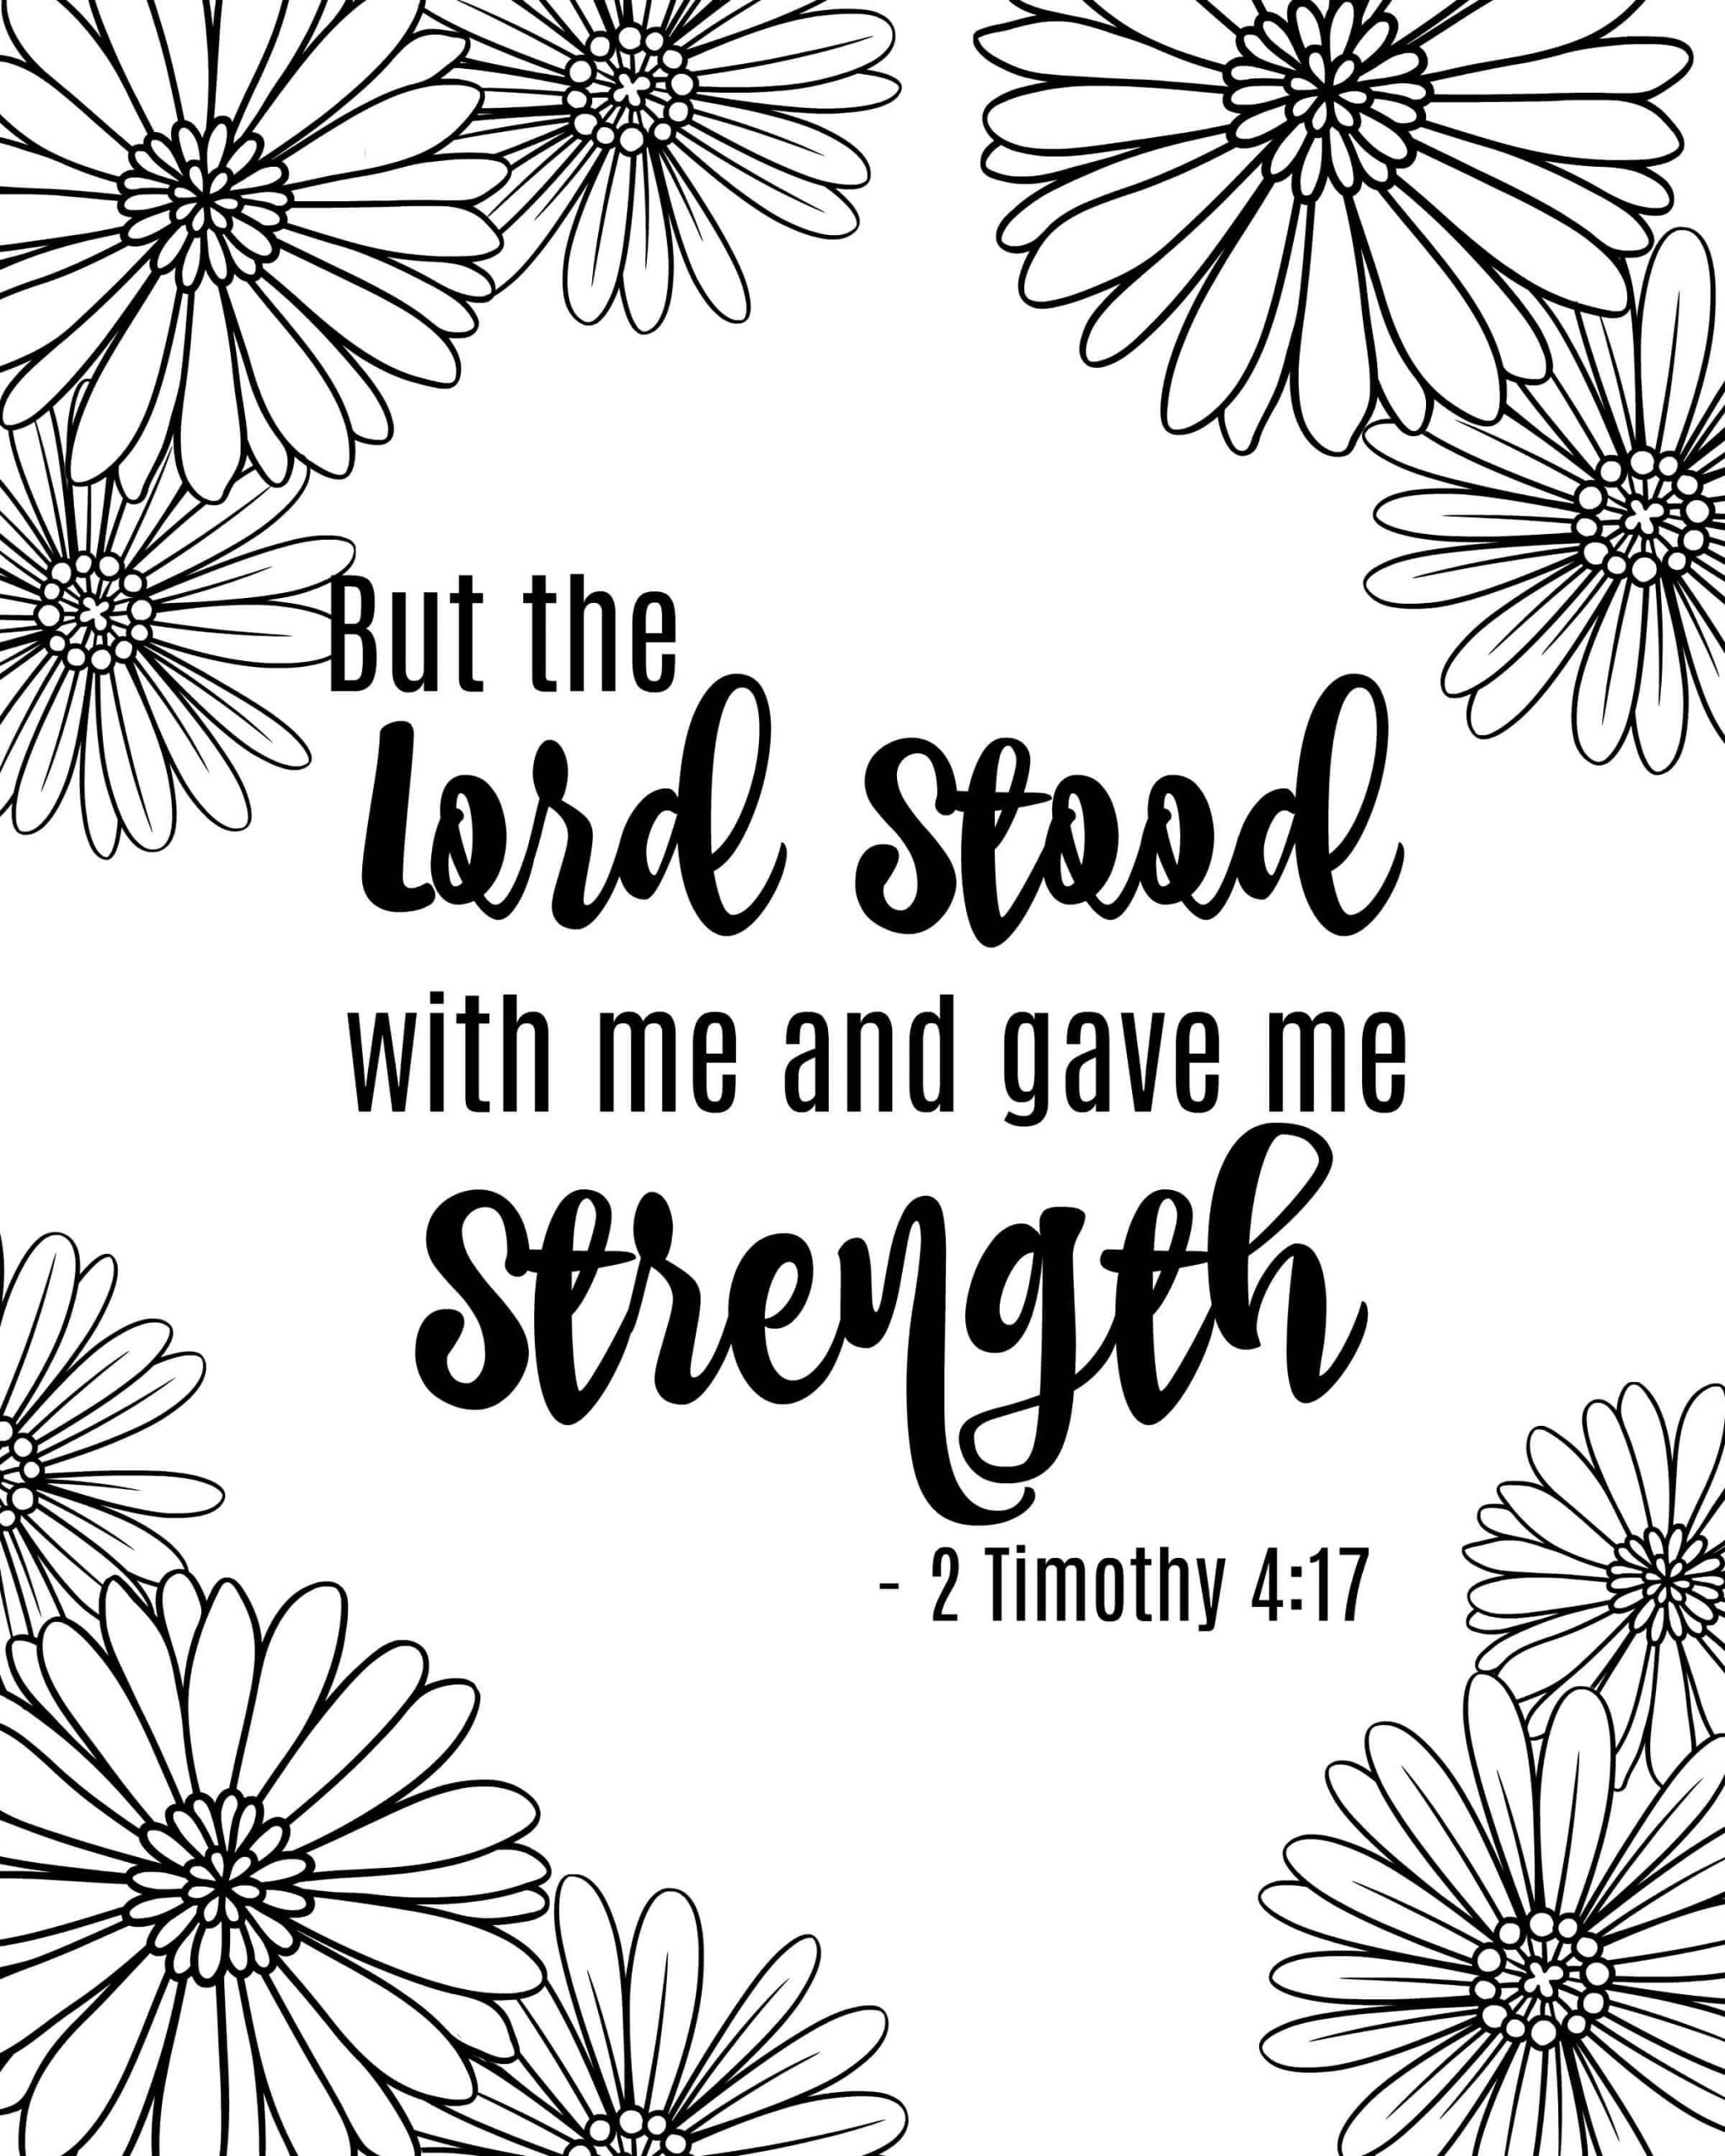 Free Printable Bible Verse Coloring Pages
 MUST HAVE FREE BIBLE VERSE PRINTABLE COLORING SHEETS